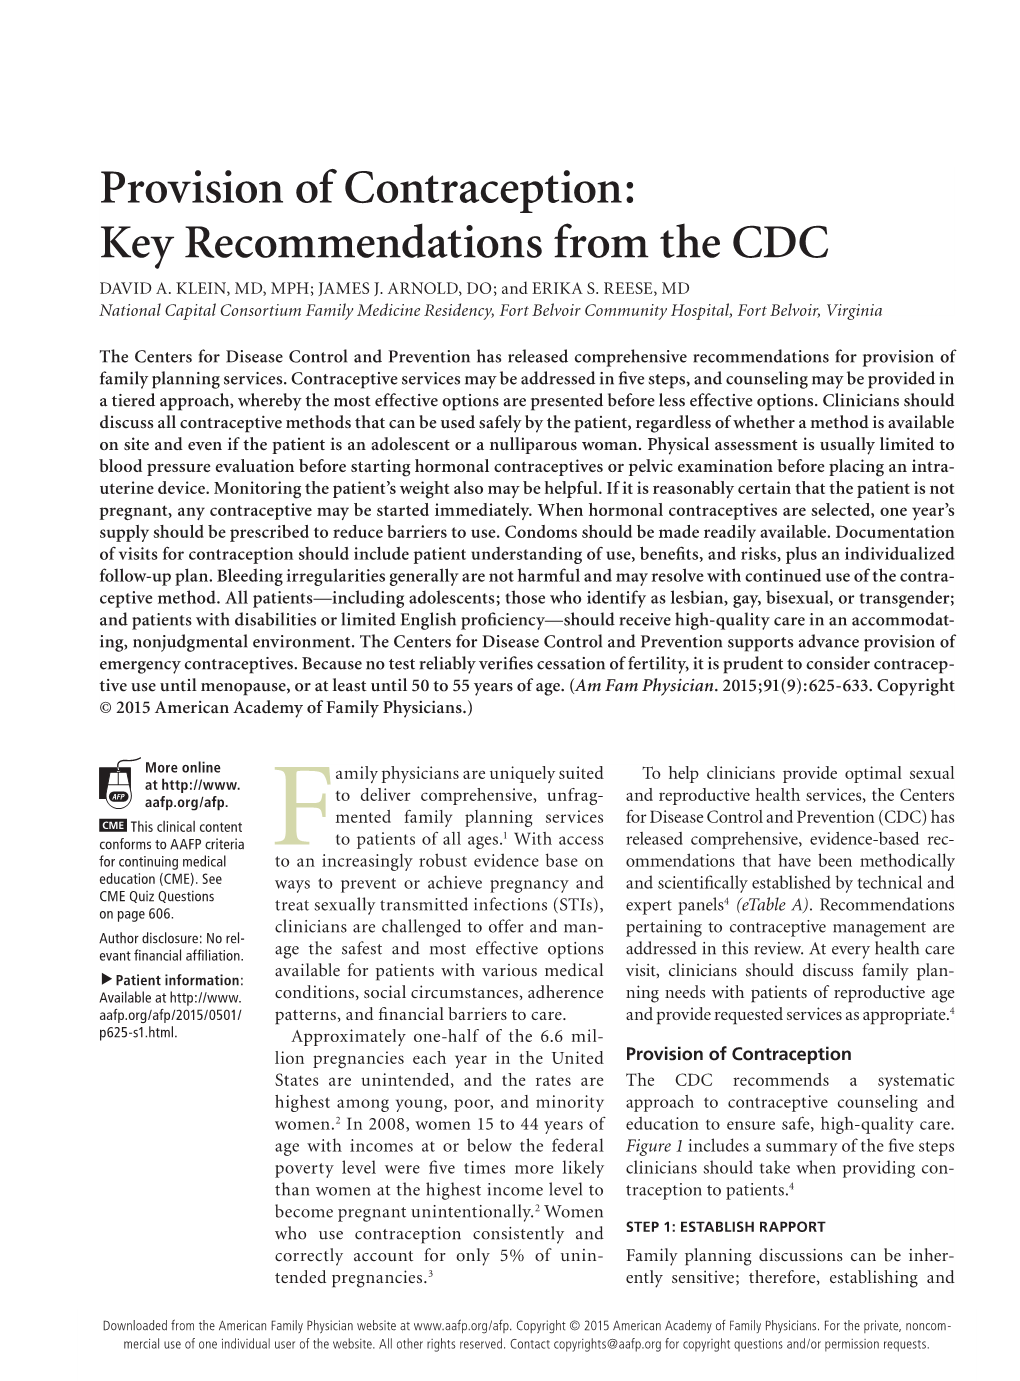 Provision of Contraception: Key Recommendations from the CDC DAVID A